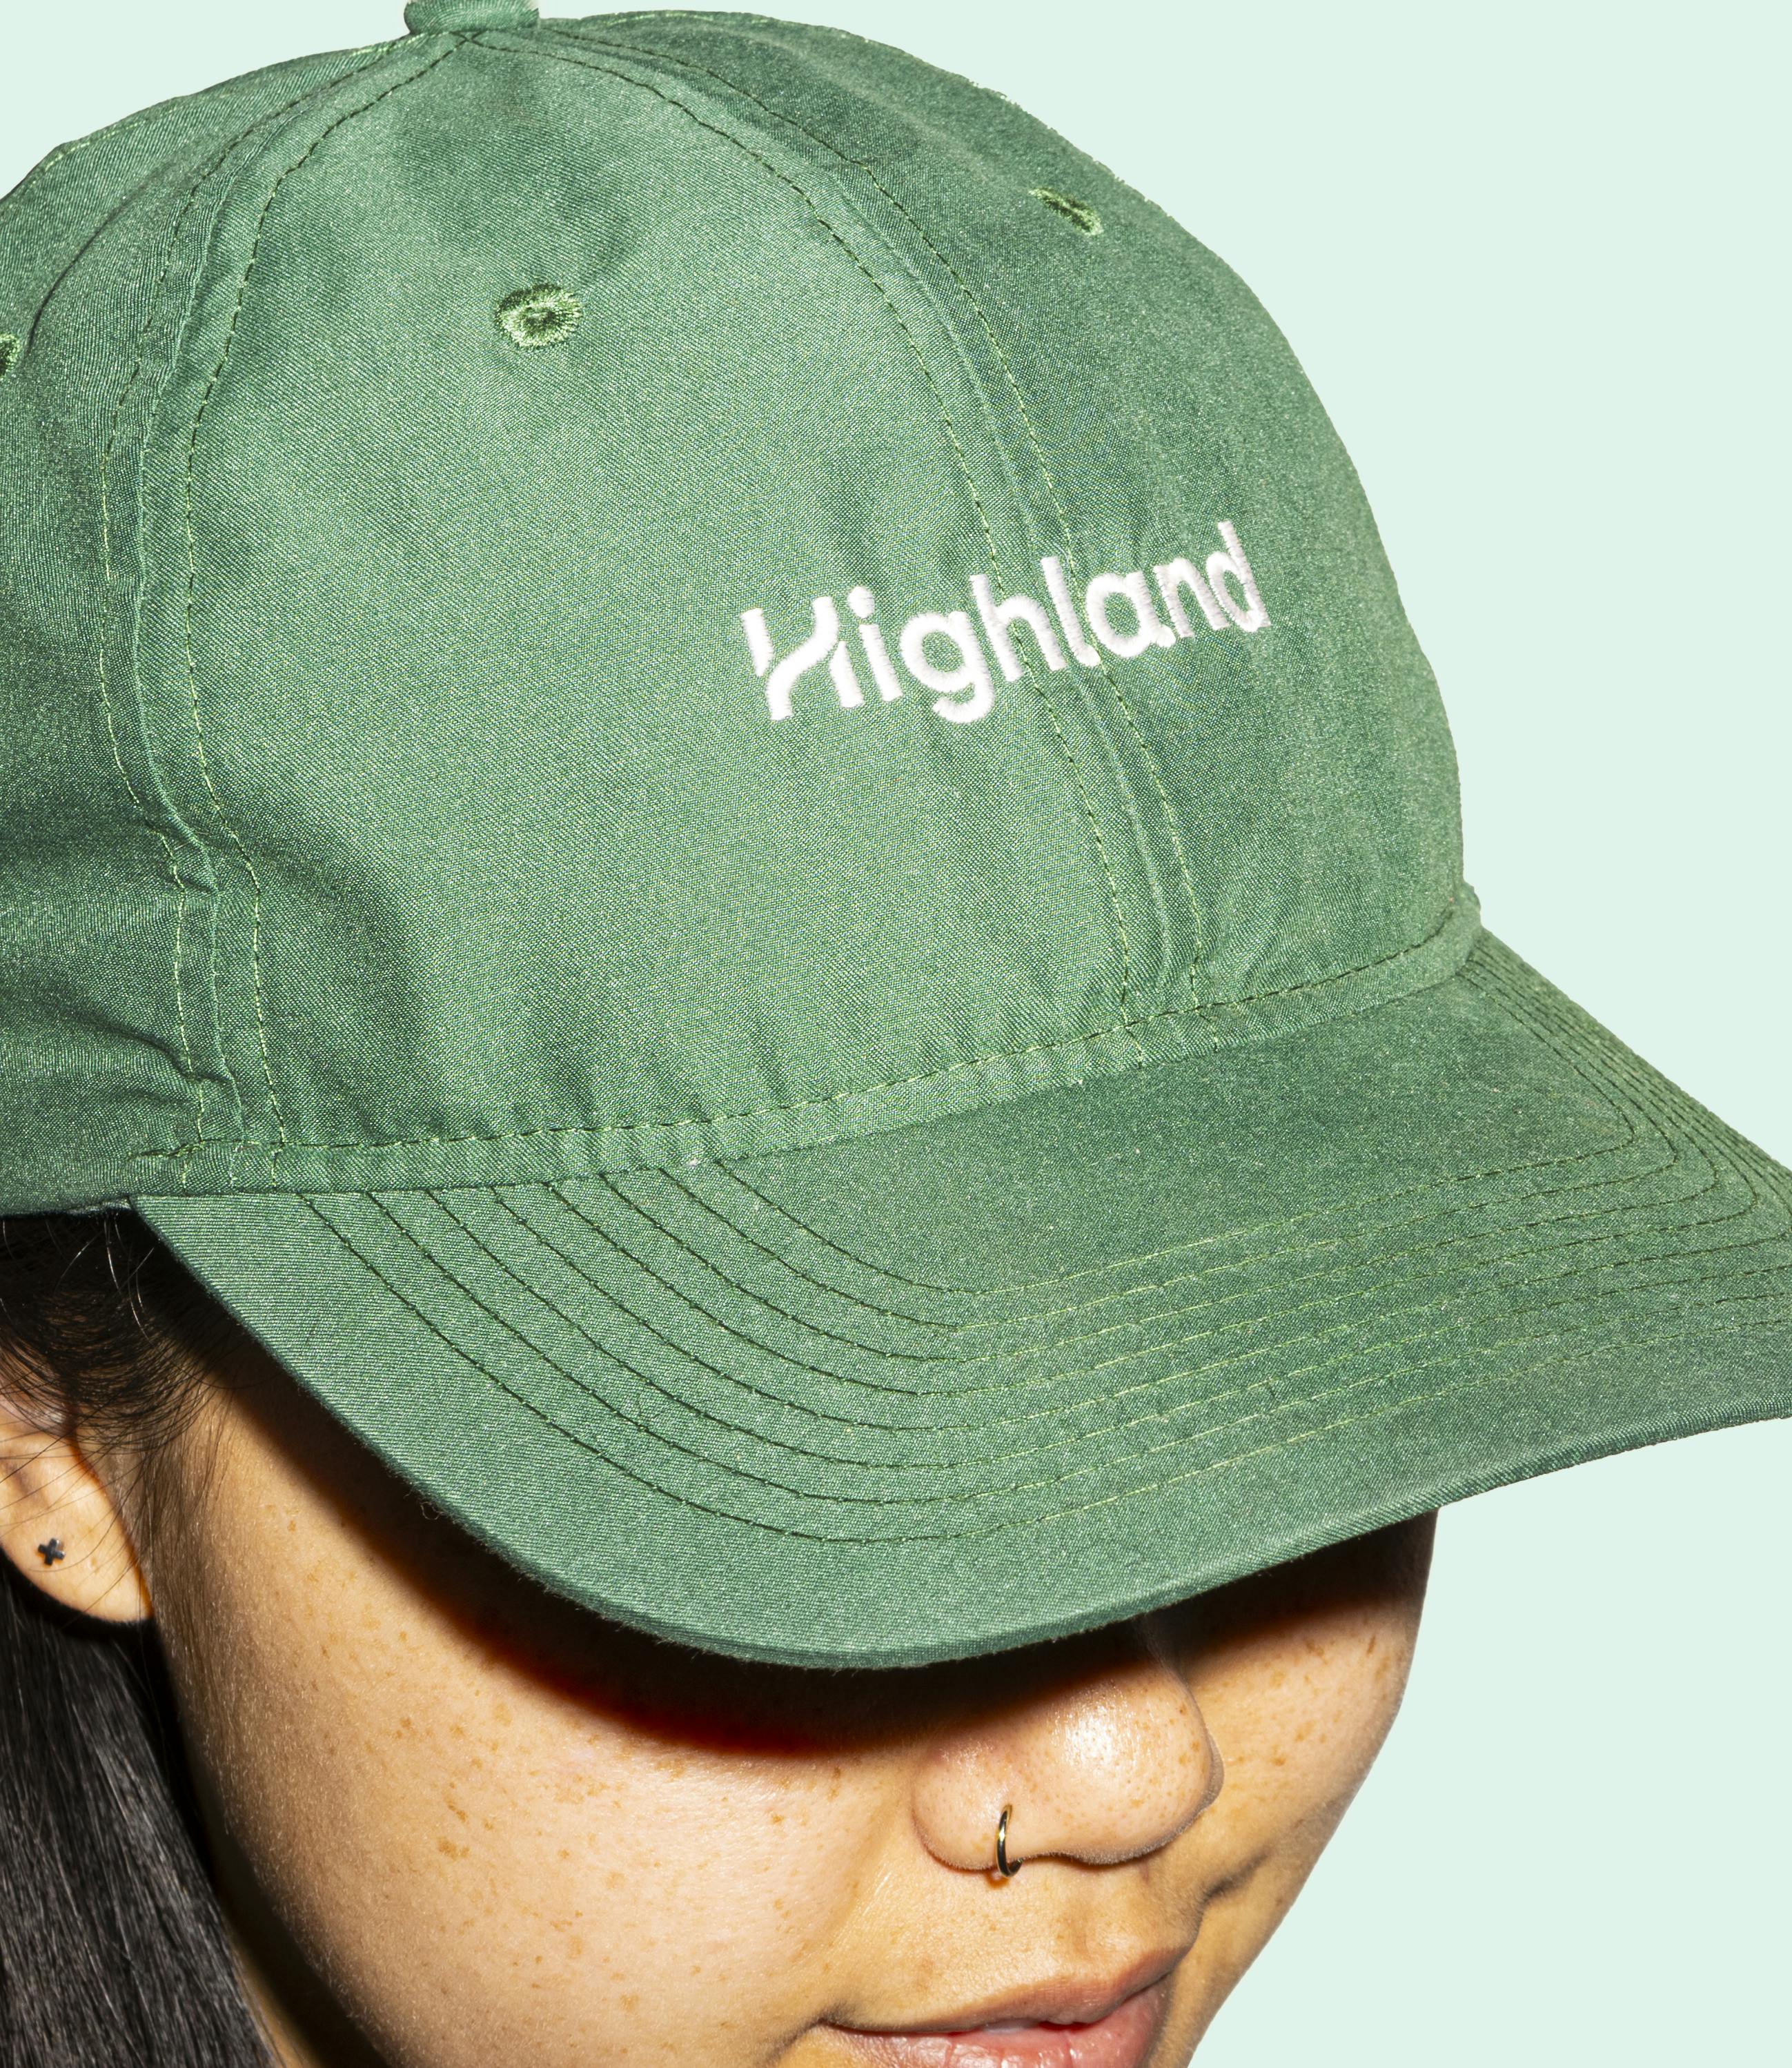 The Highland logo embroidered on a green hat.